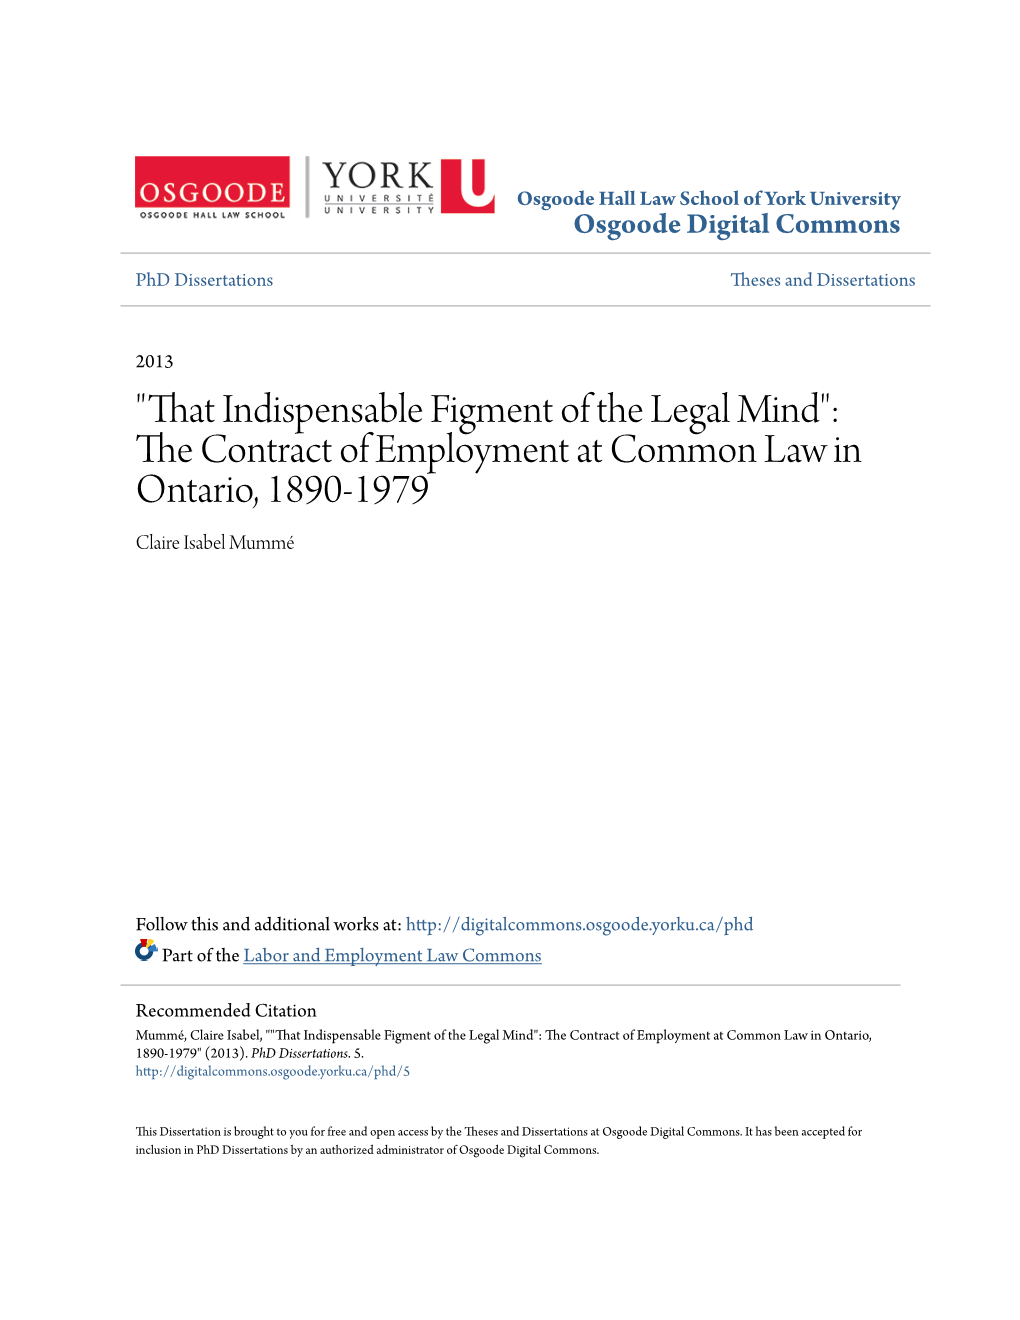 The Contract of Employment at Common Law in Ontario, 1890-1979